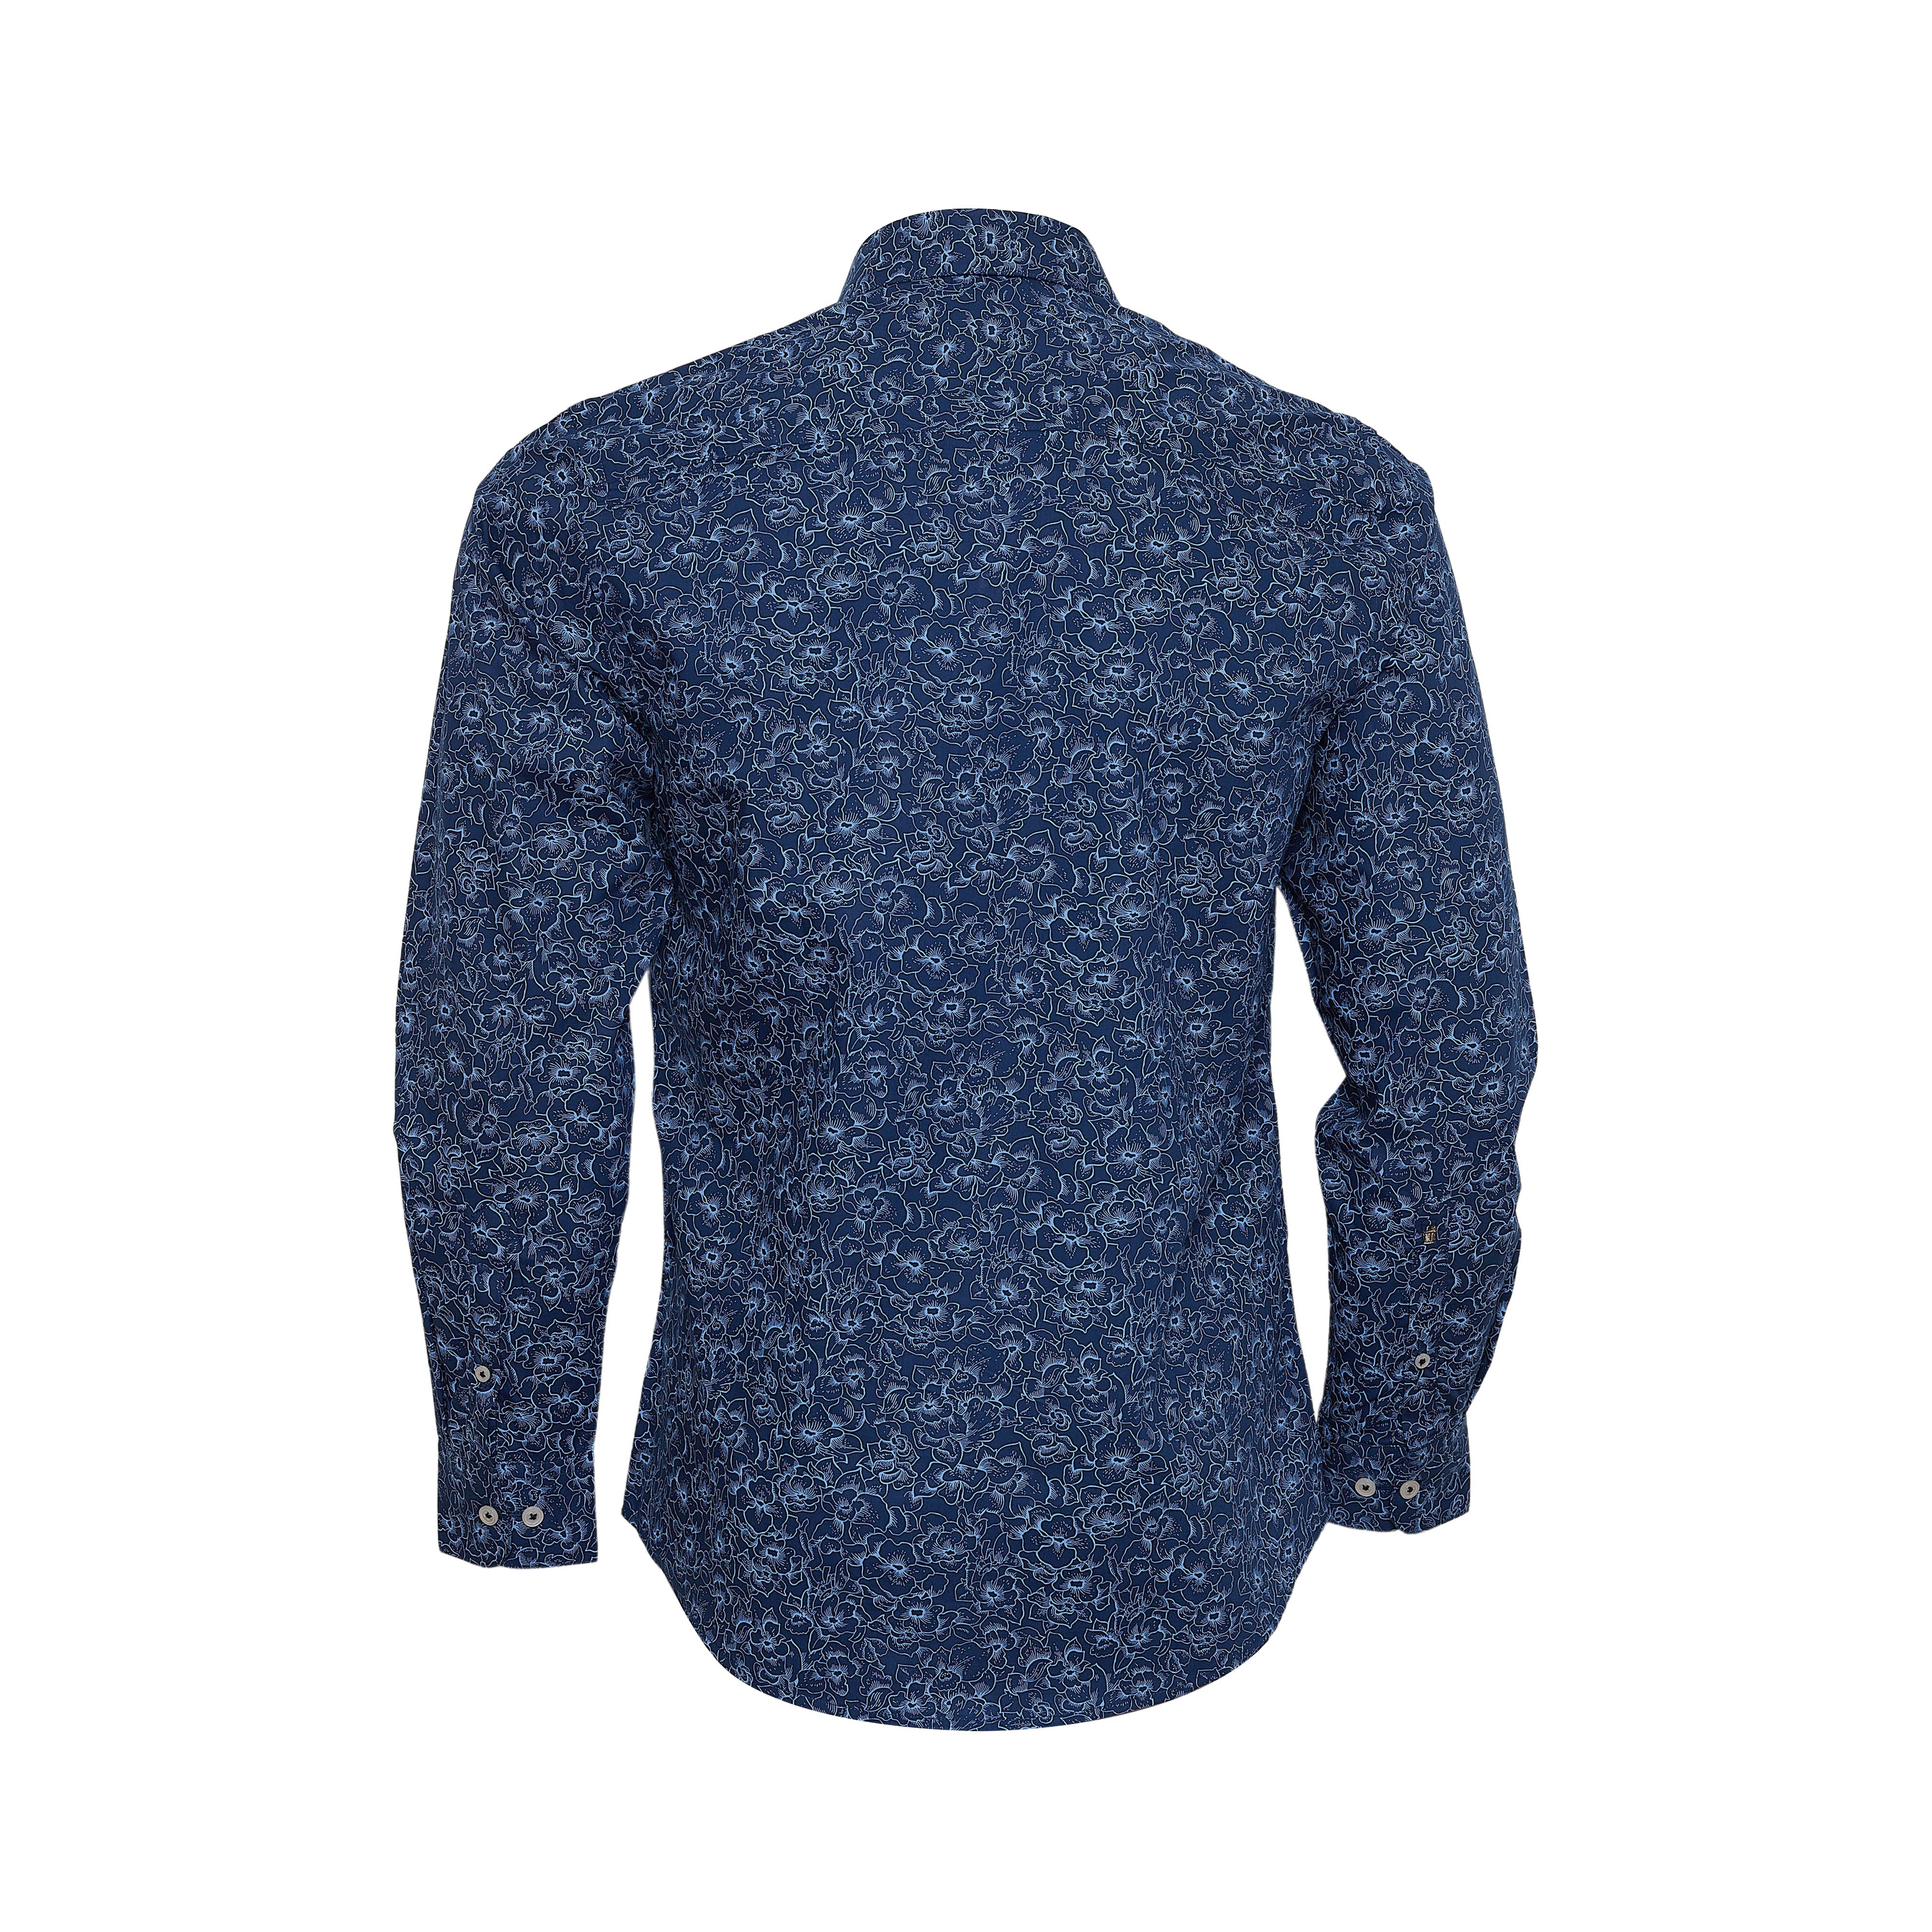 Superfine Cotton, Blue Floral Printed Full-sleeved shirt